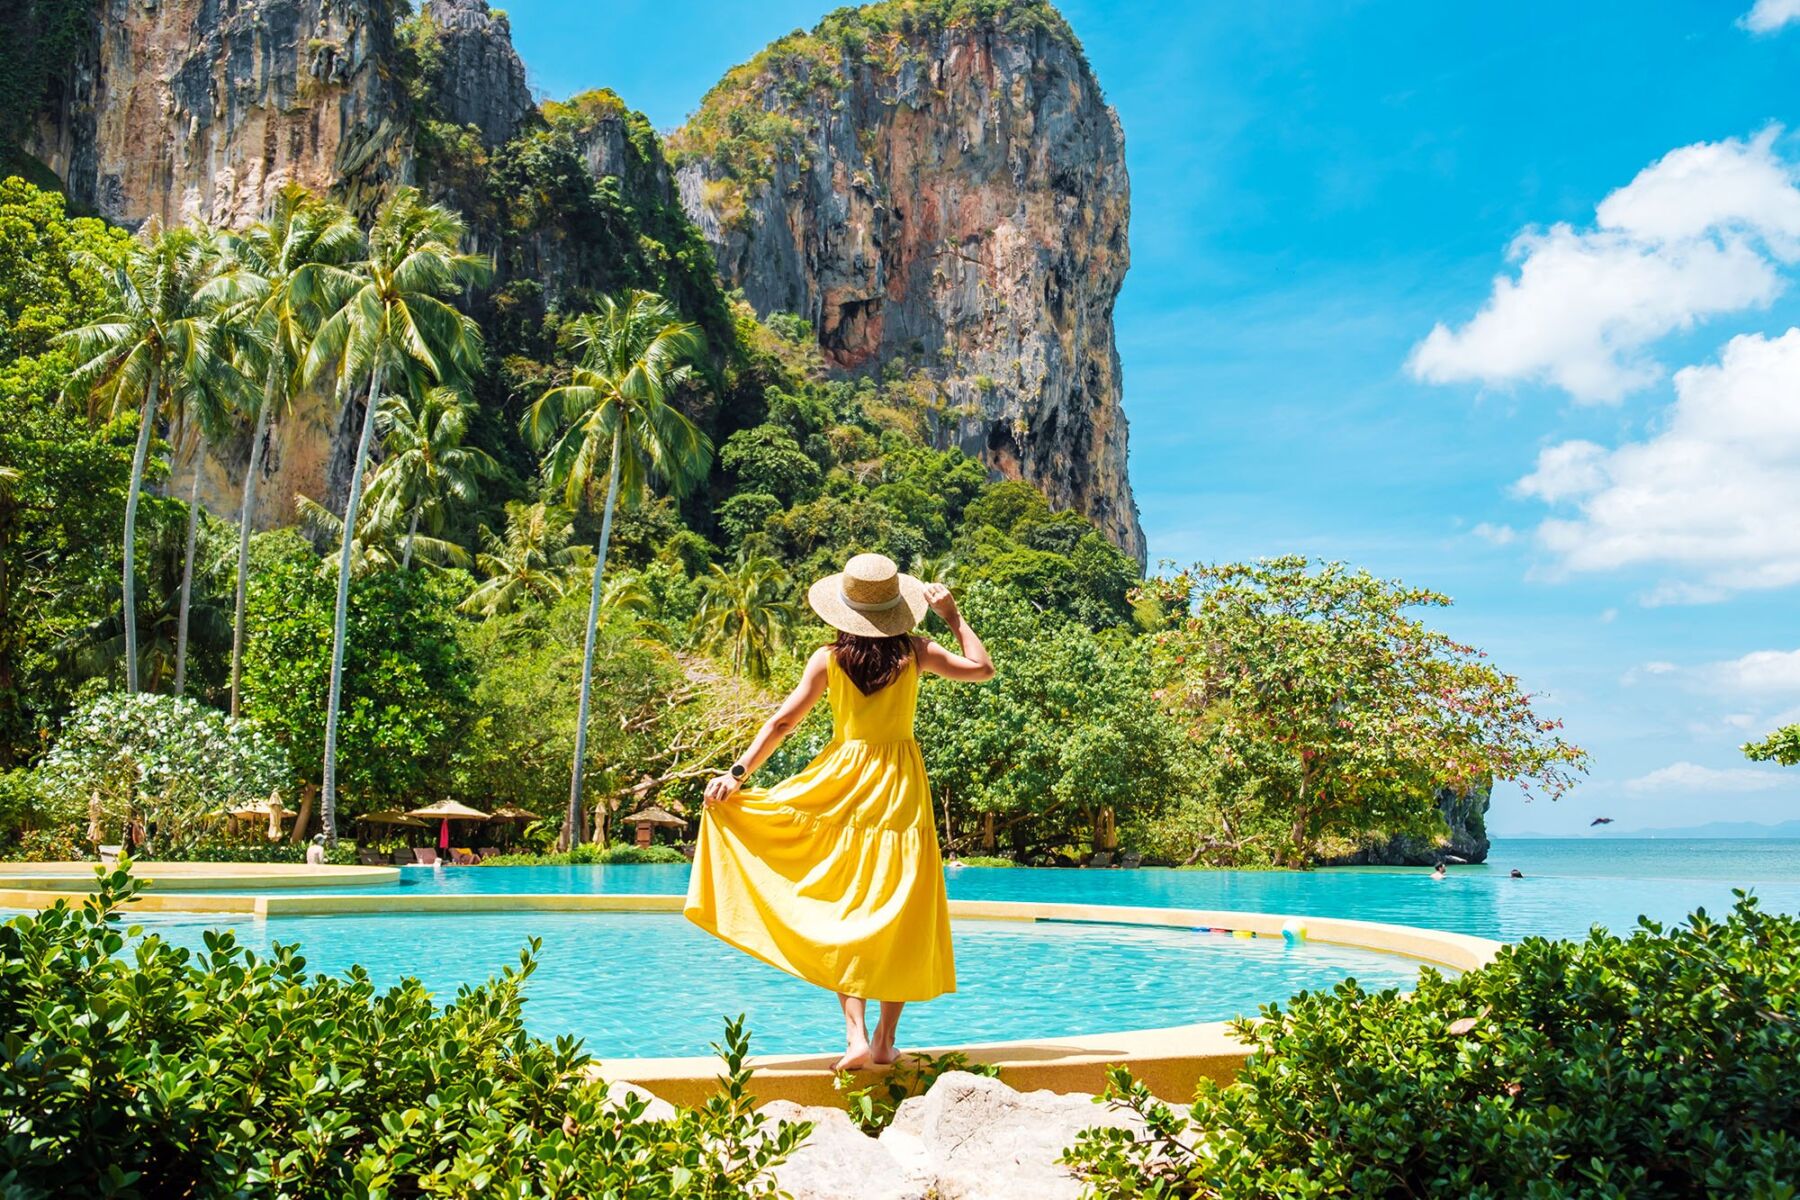 Buy Our Honeymoon - the modern way to plan your honeymoon. Woman in a yellow dress standing by a swimming pool by the sea, surrounded by tall rocks and palm trees.